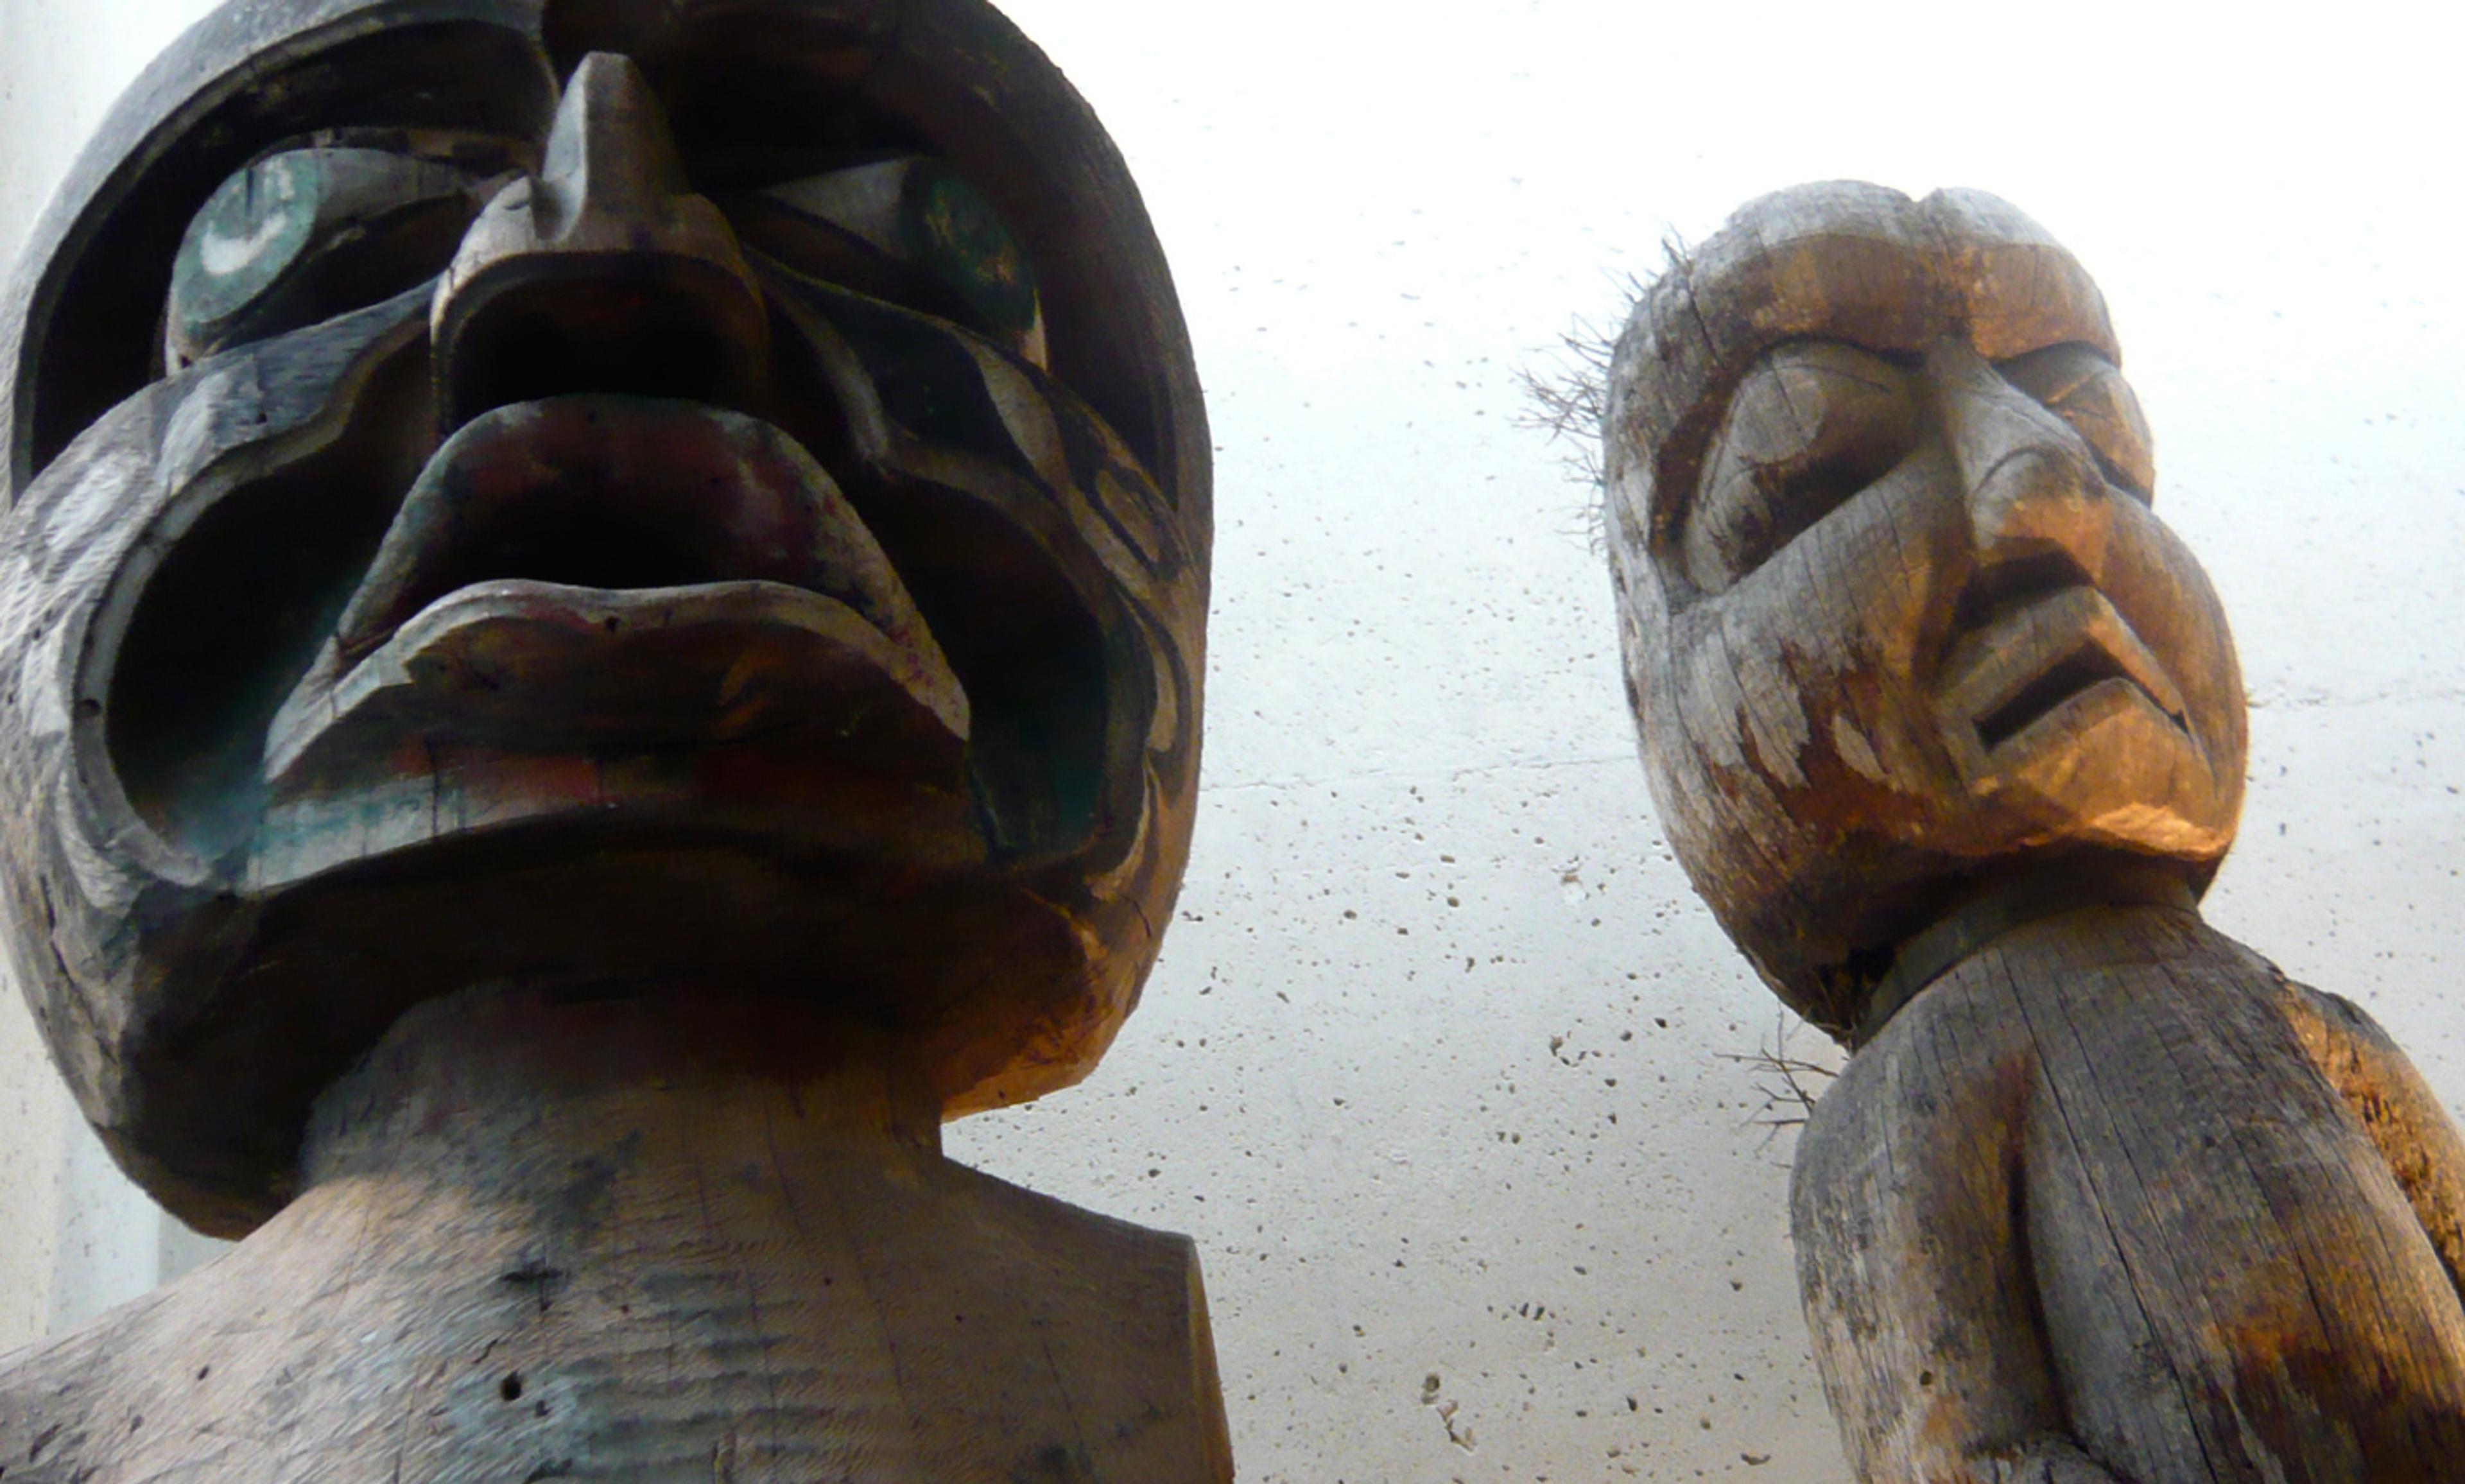 <p>At the Museum of Anthropology at UBC. <em>Photo by Allegro-Takahi/Flickr</em></p>